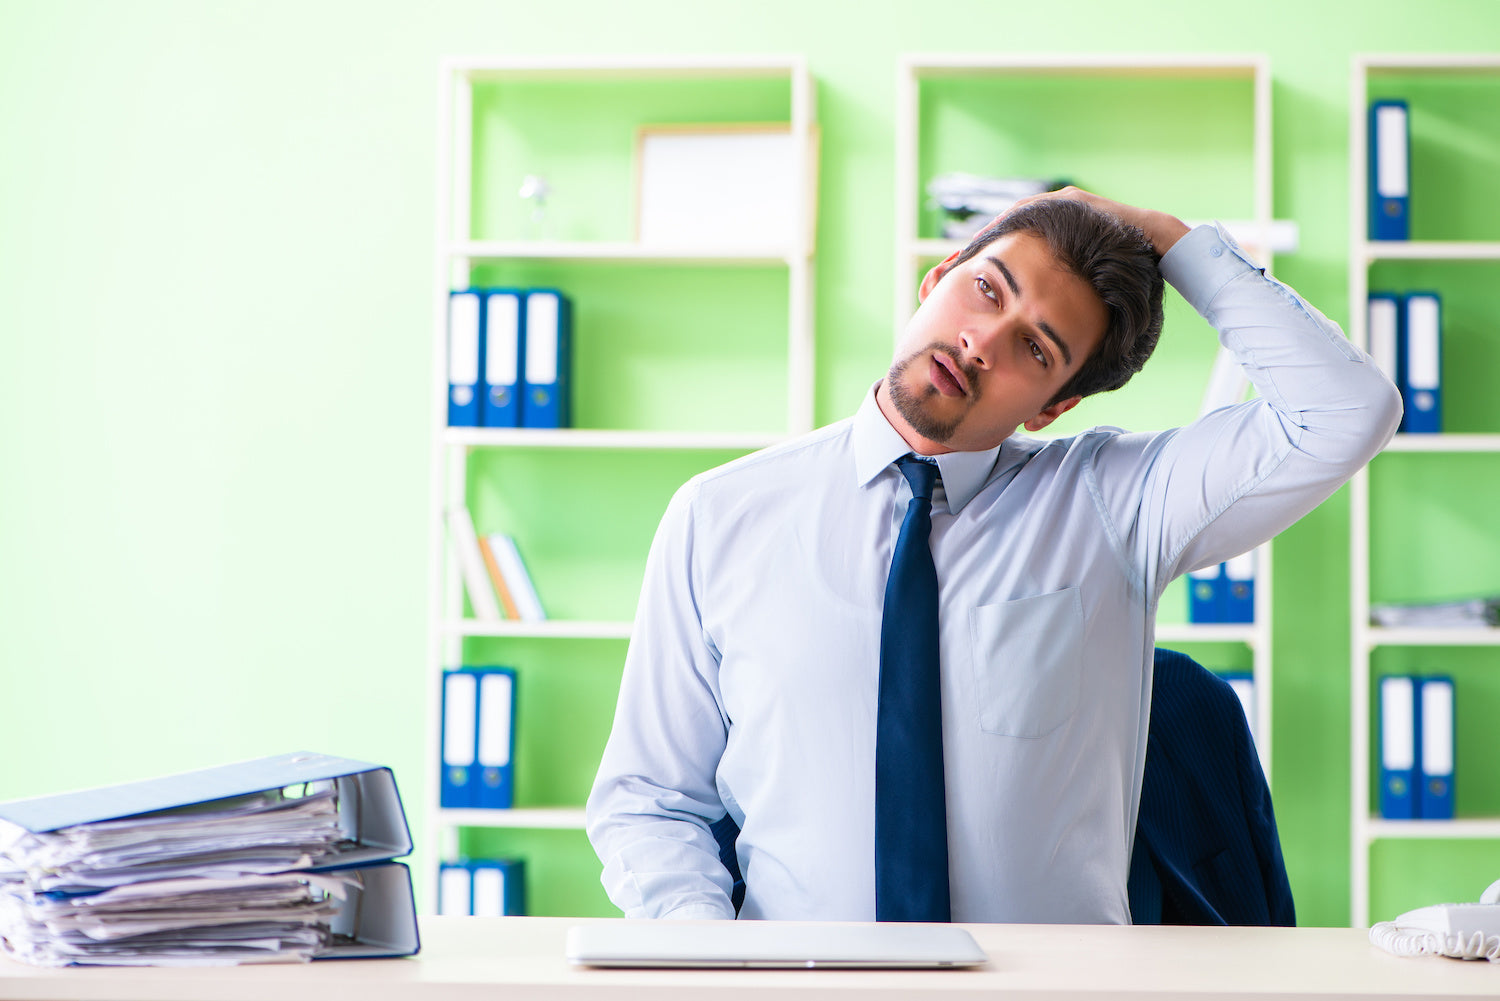 4 Easy Neck Stretches You Can Do at Your Desk to Make the Pain Go Away